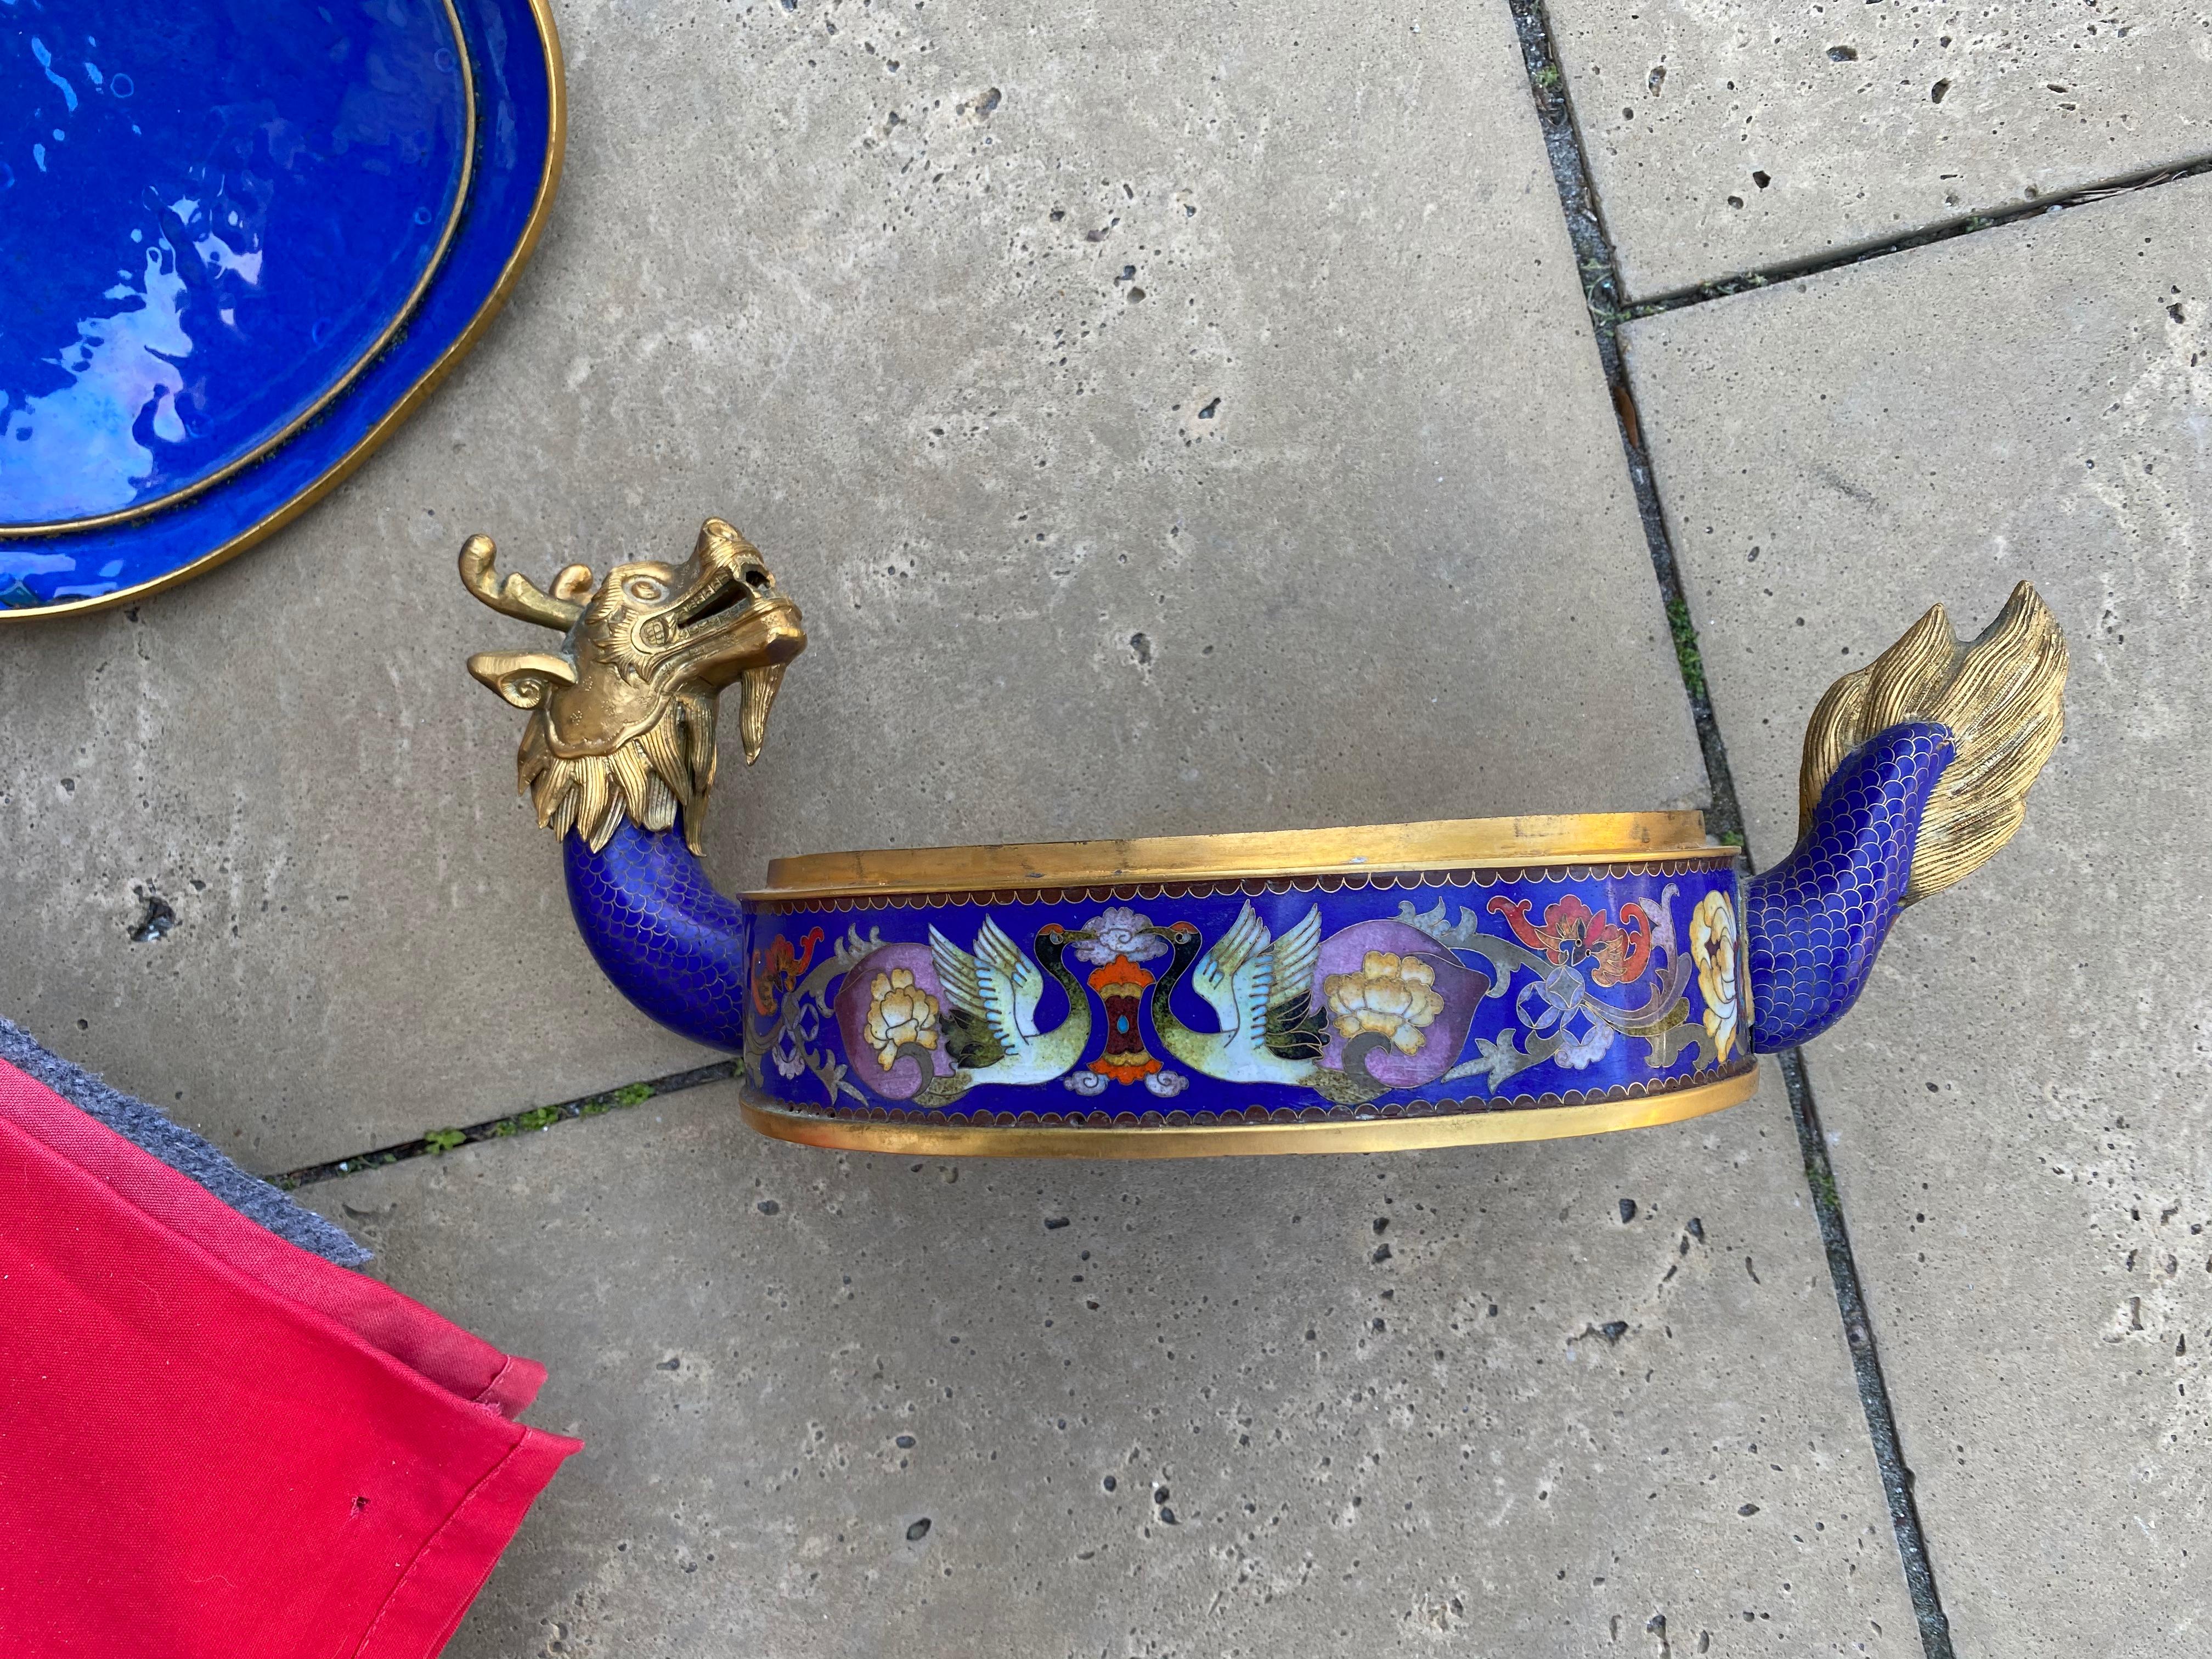 This Chinese Censer
is in the design of a Turtle/Dragon which is legendary creature that combines two of the four celestial animals of Chinese mythology the body of a turtle and head of a dragon is promoted as a positive ornament in Feng Shui